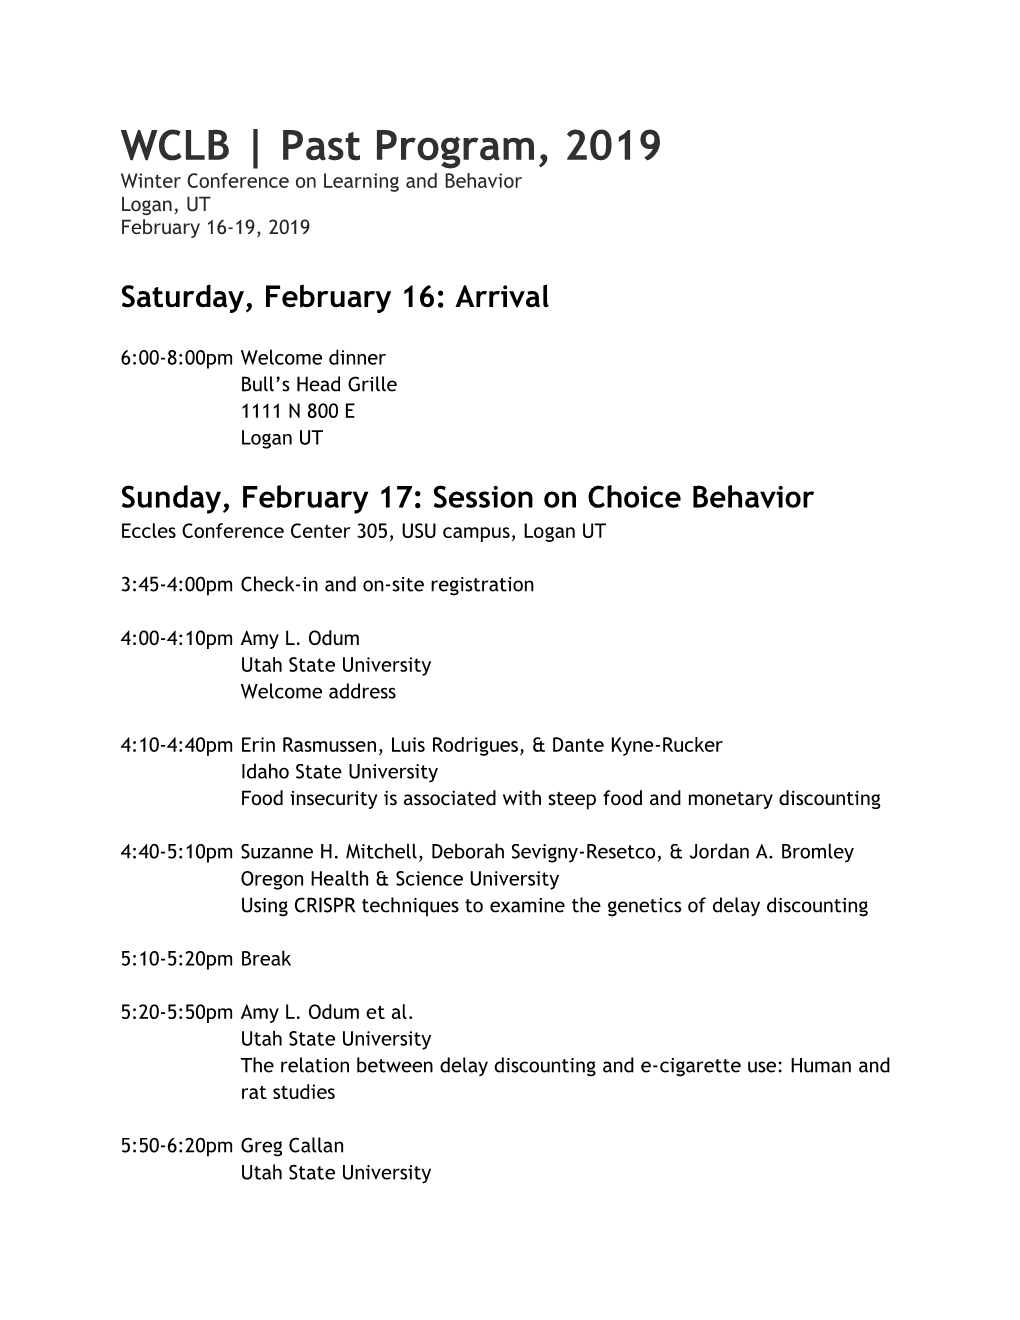 WCLB | Past Program, 2019 Winter Conference on Learning and Behavior Logan, UT February 16-19, 2019